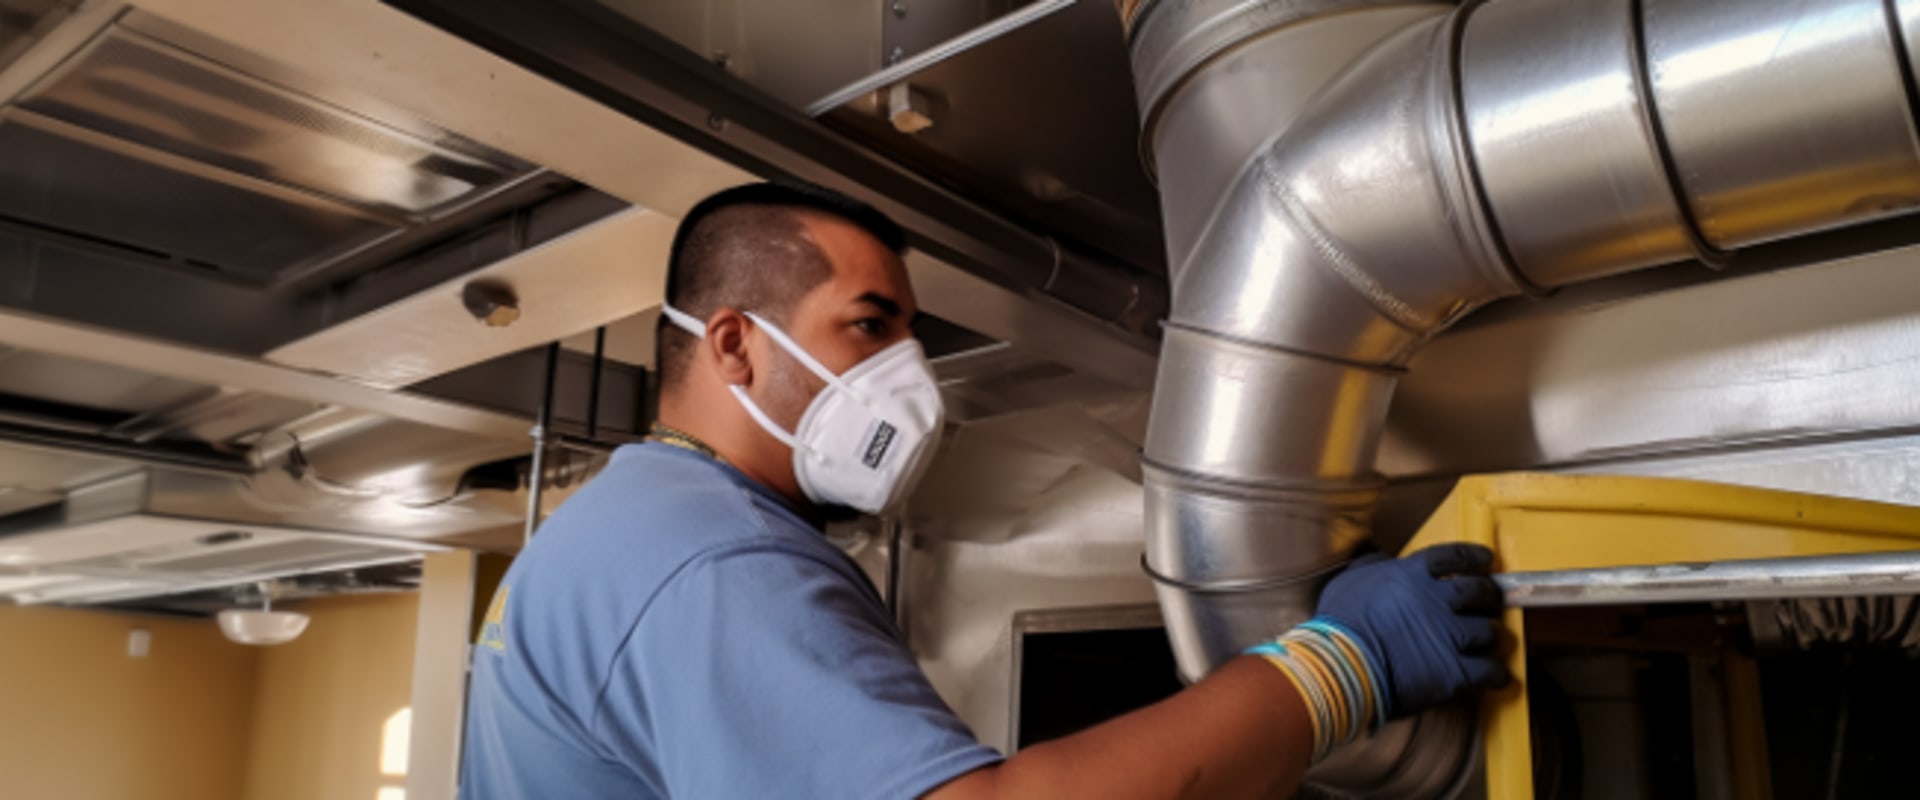 Appropriate Air Duct Cleaning Service in Cutler Bay FL